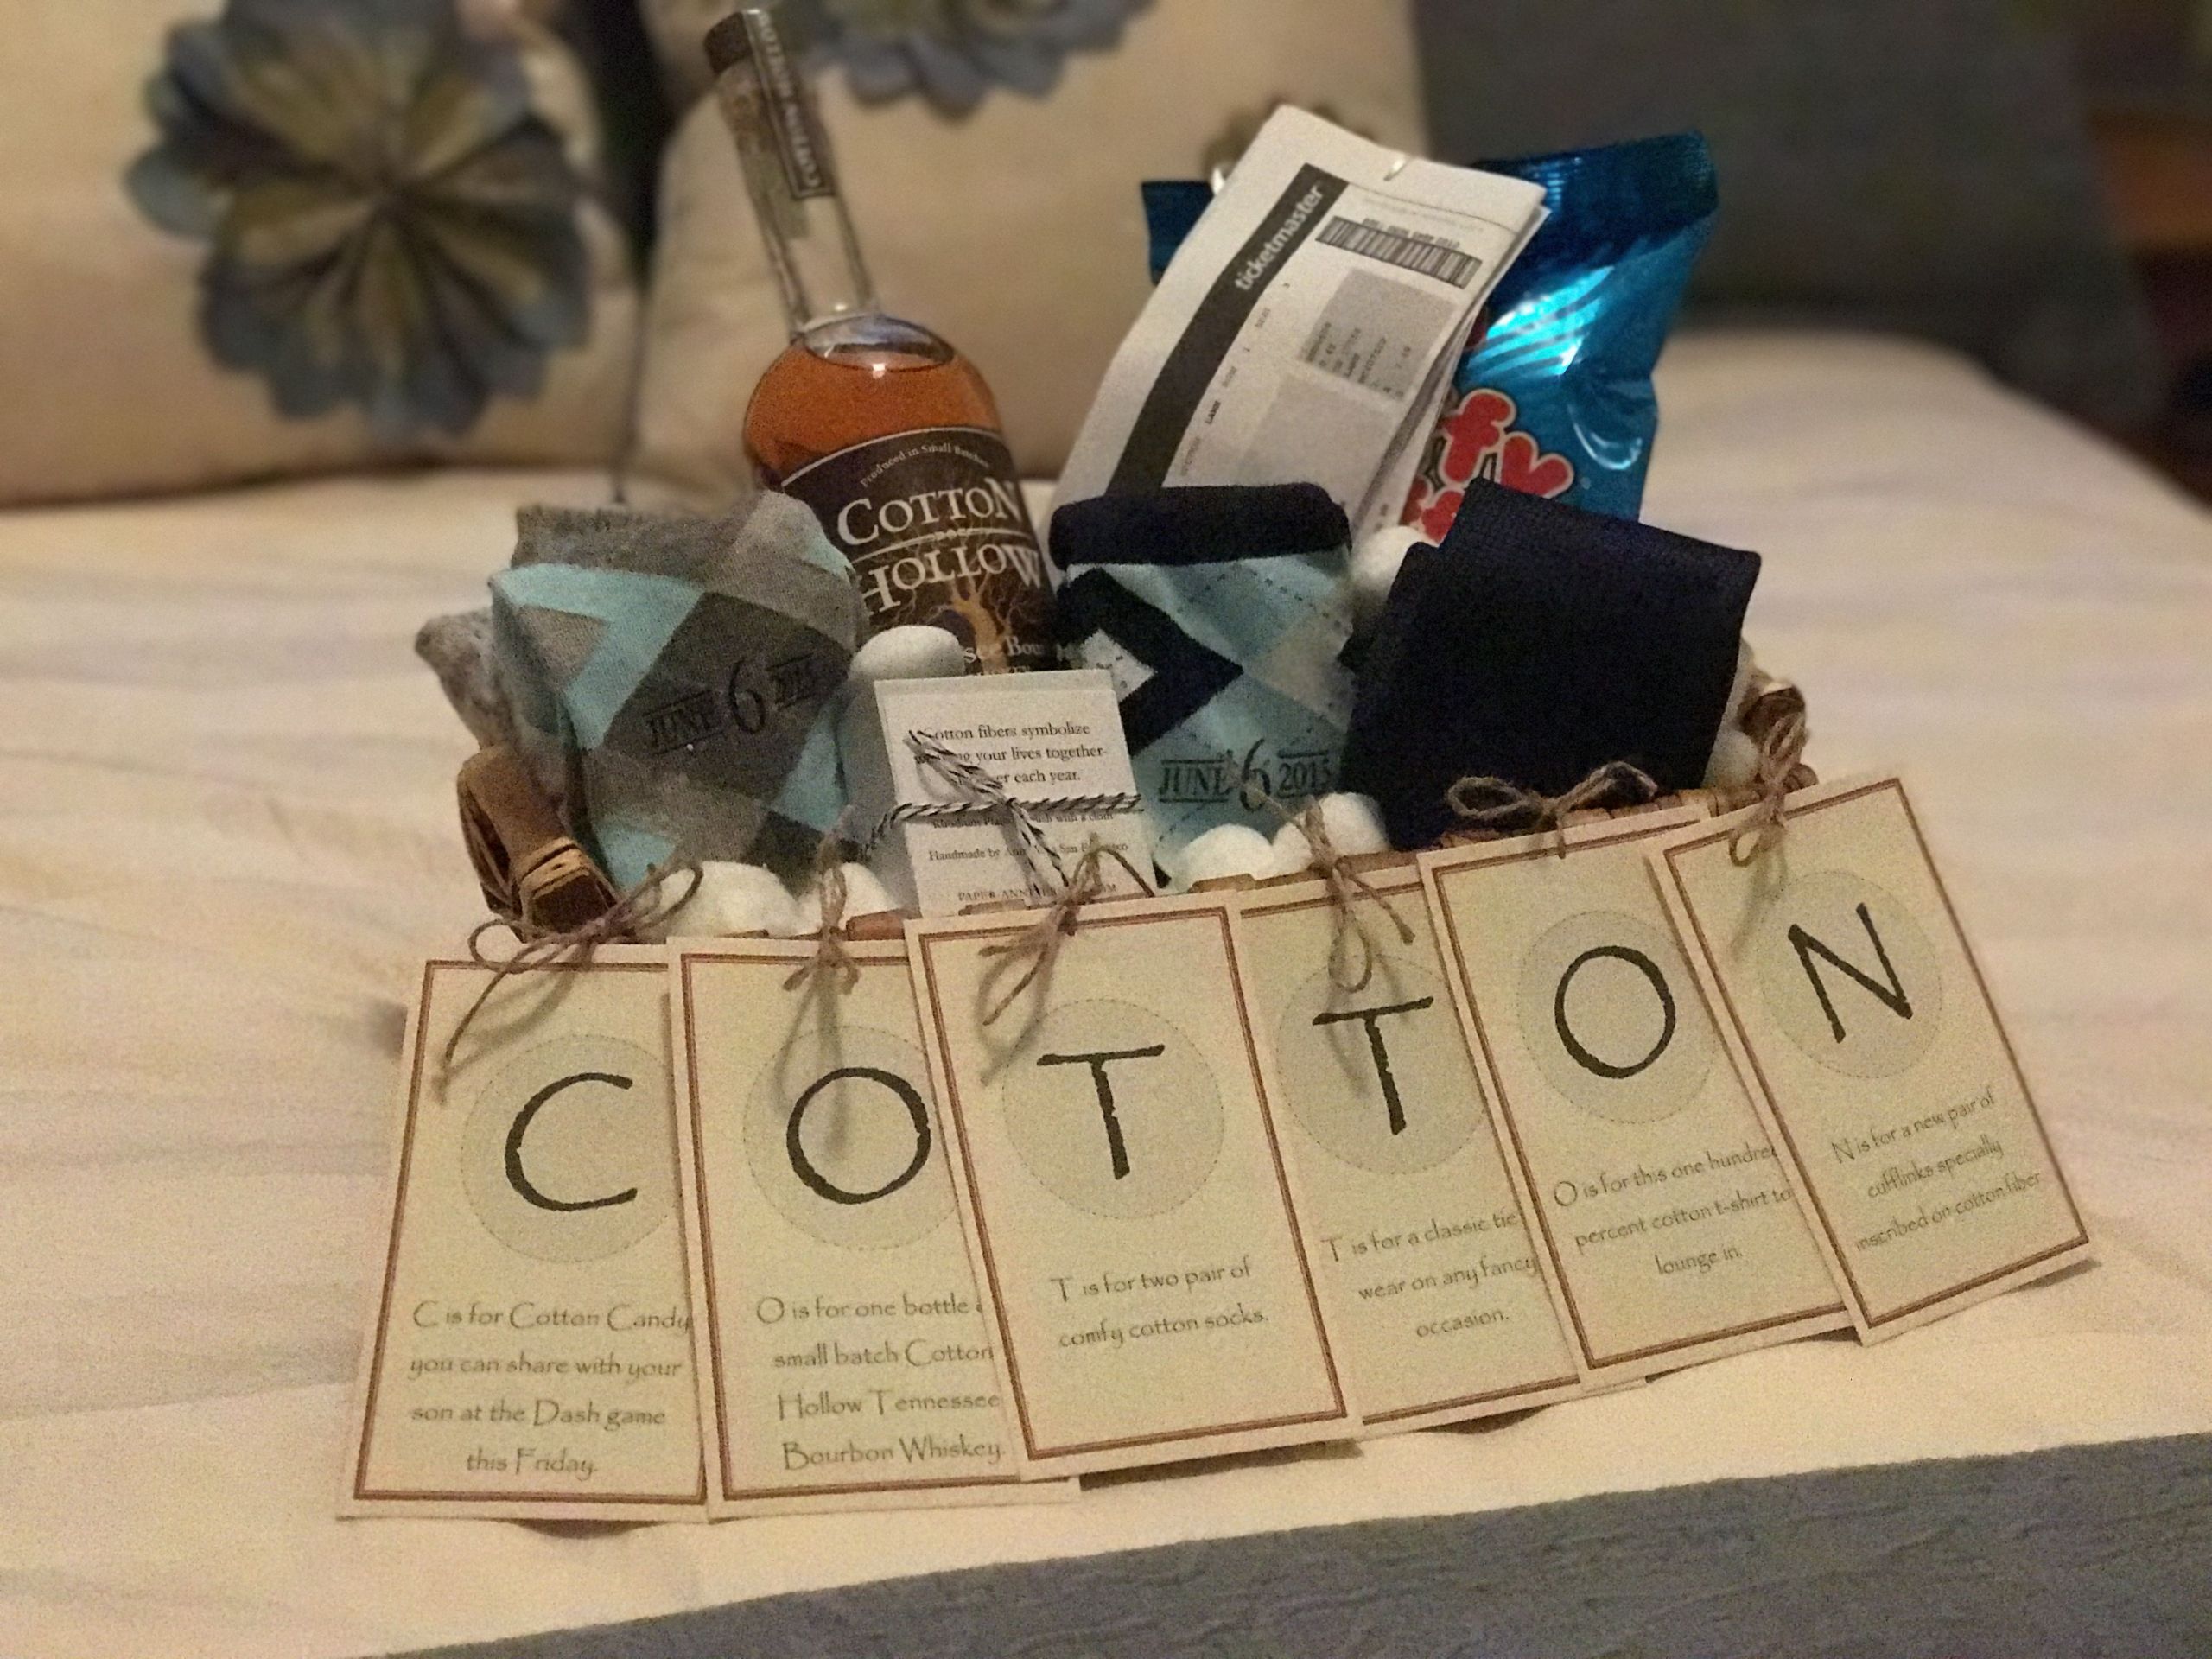 2 Year Anniversary Cotton Gift Ideas
 The "Cotton" Anniversary Gift for Him